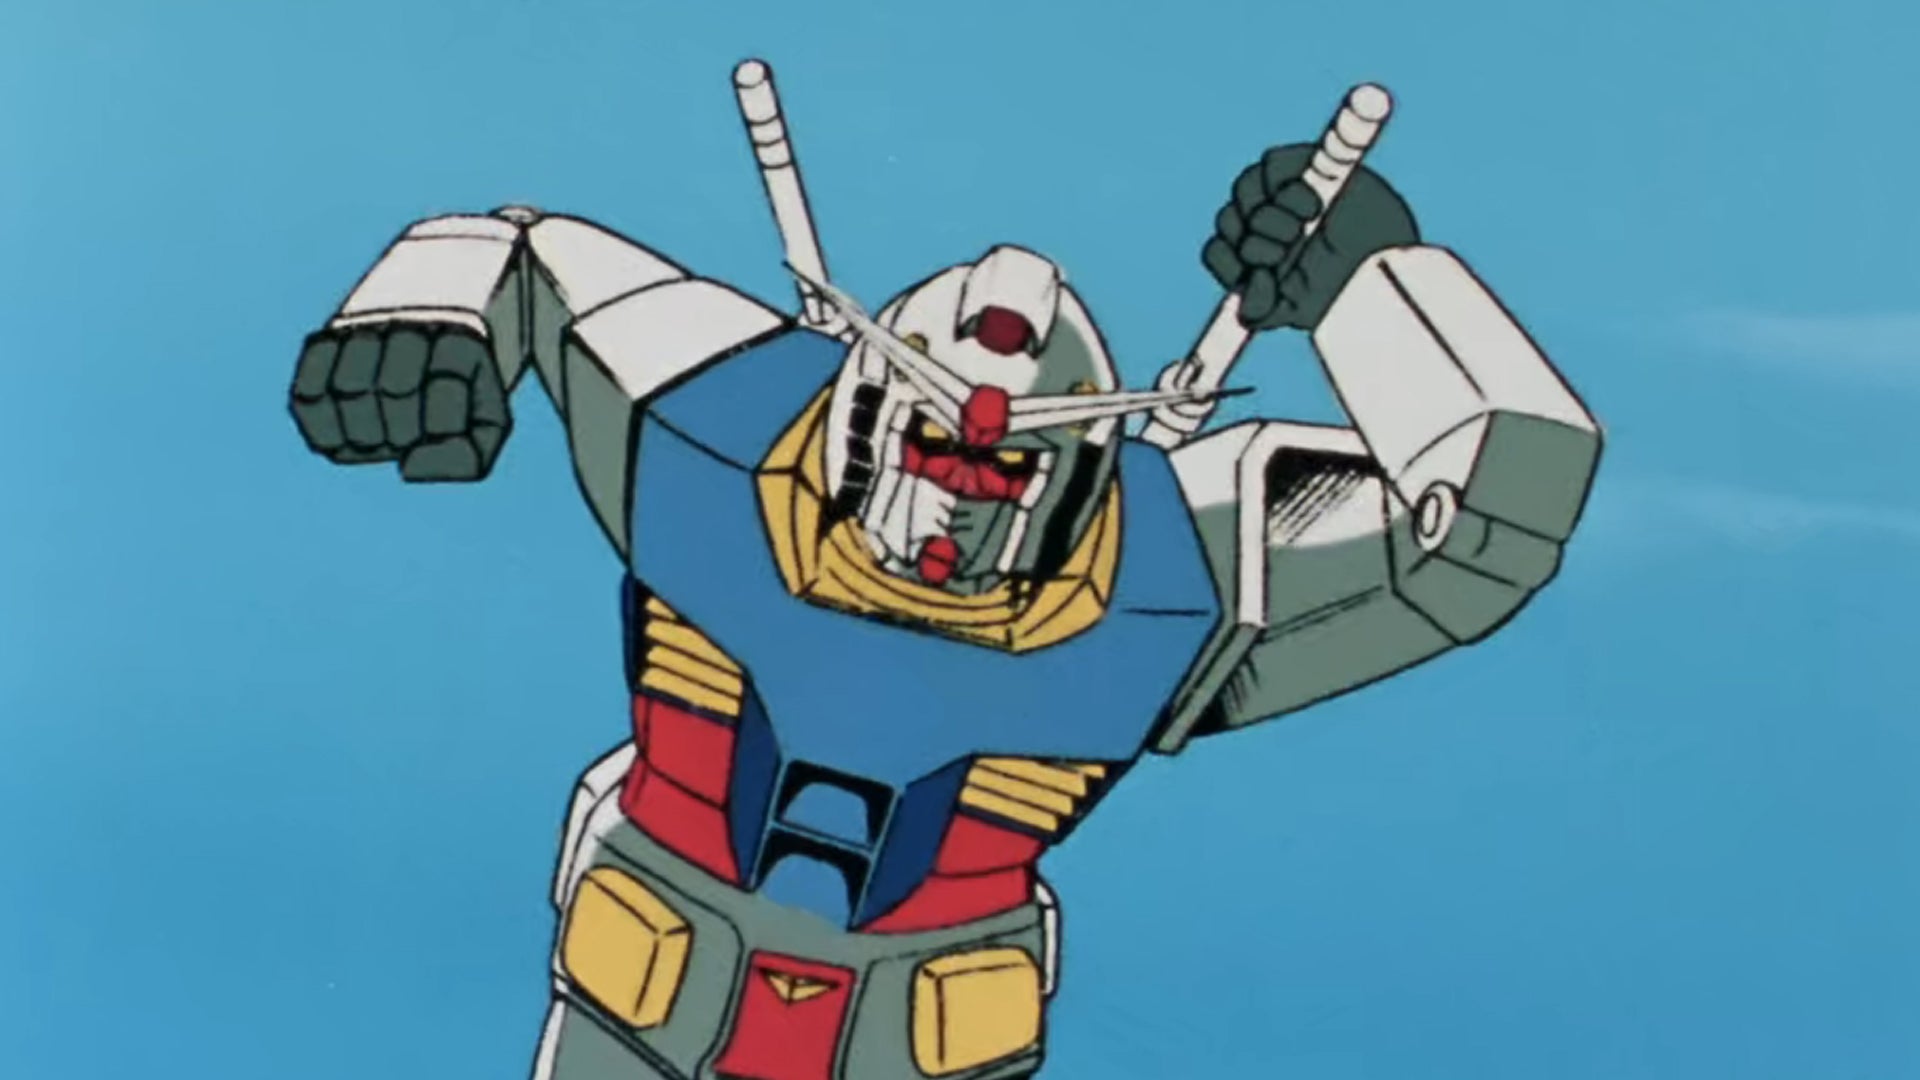 The RX78-2 Gundam from Mobile Suit Gundam.